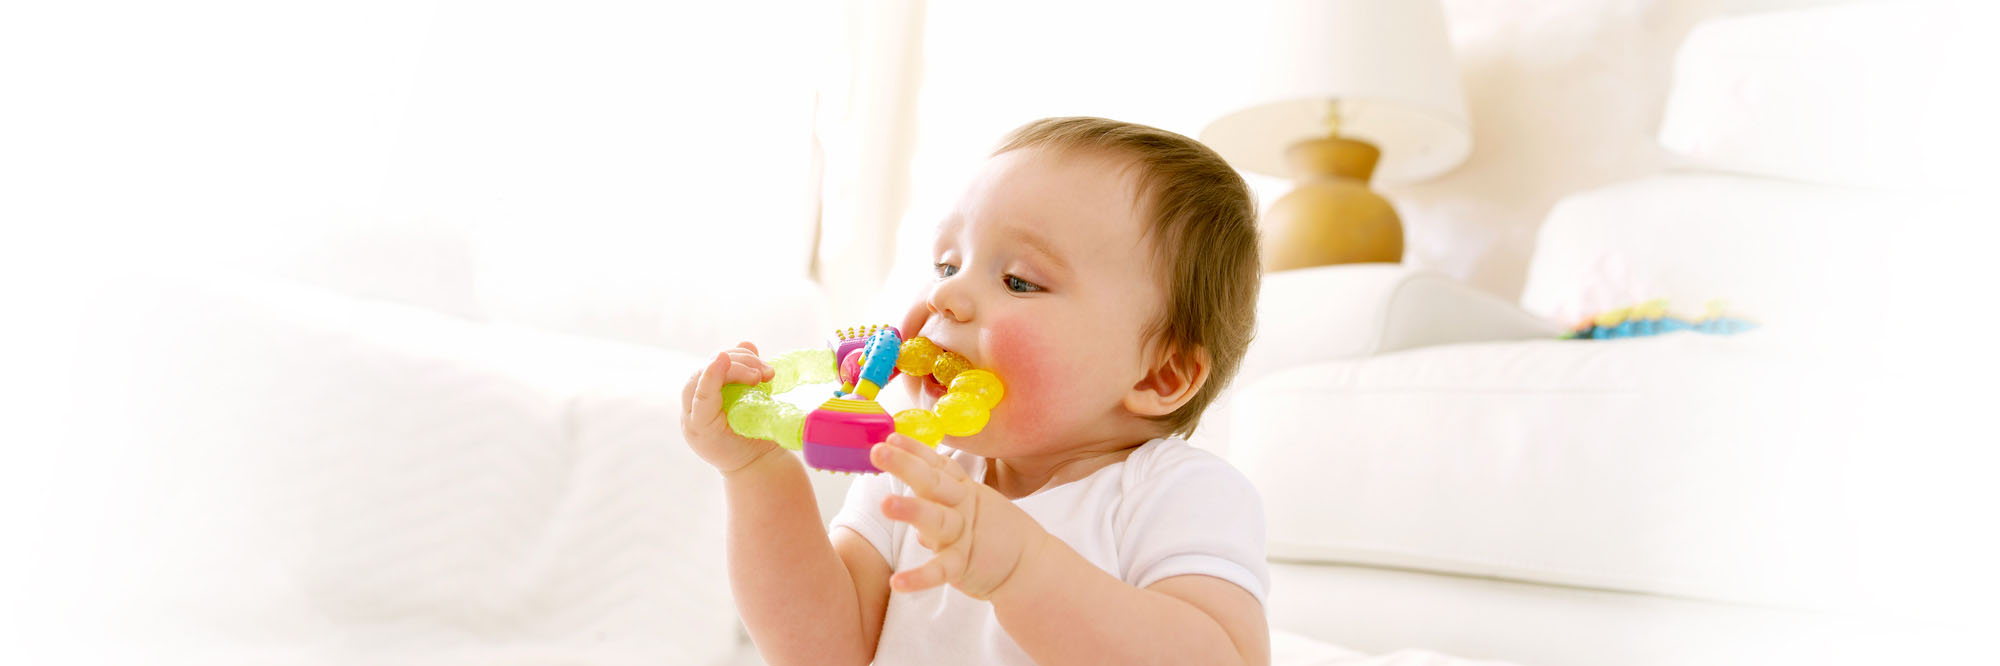 At what age do small children get started teething?